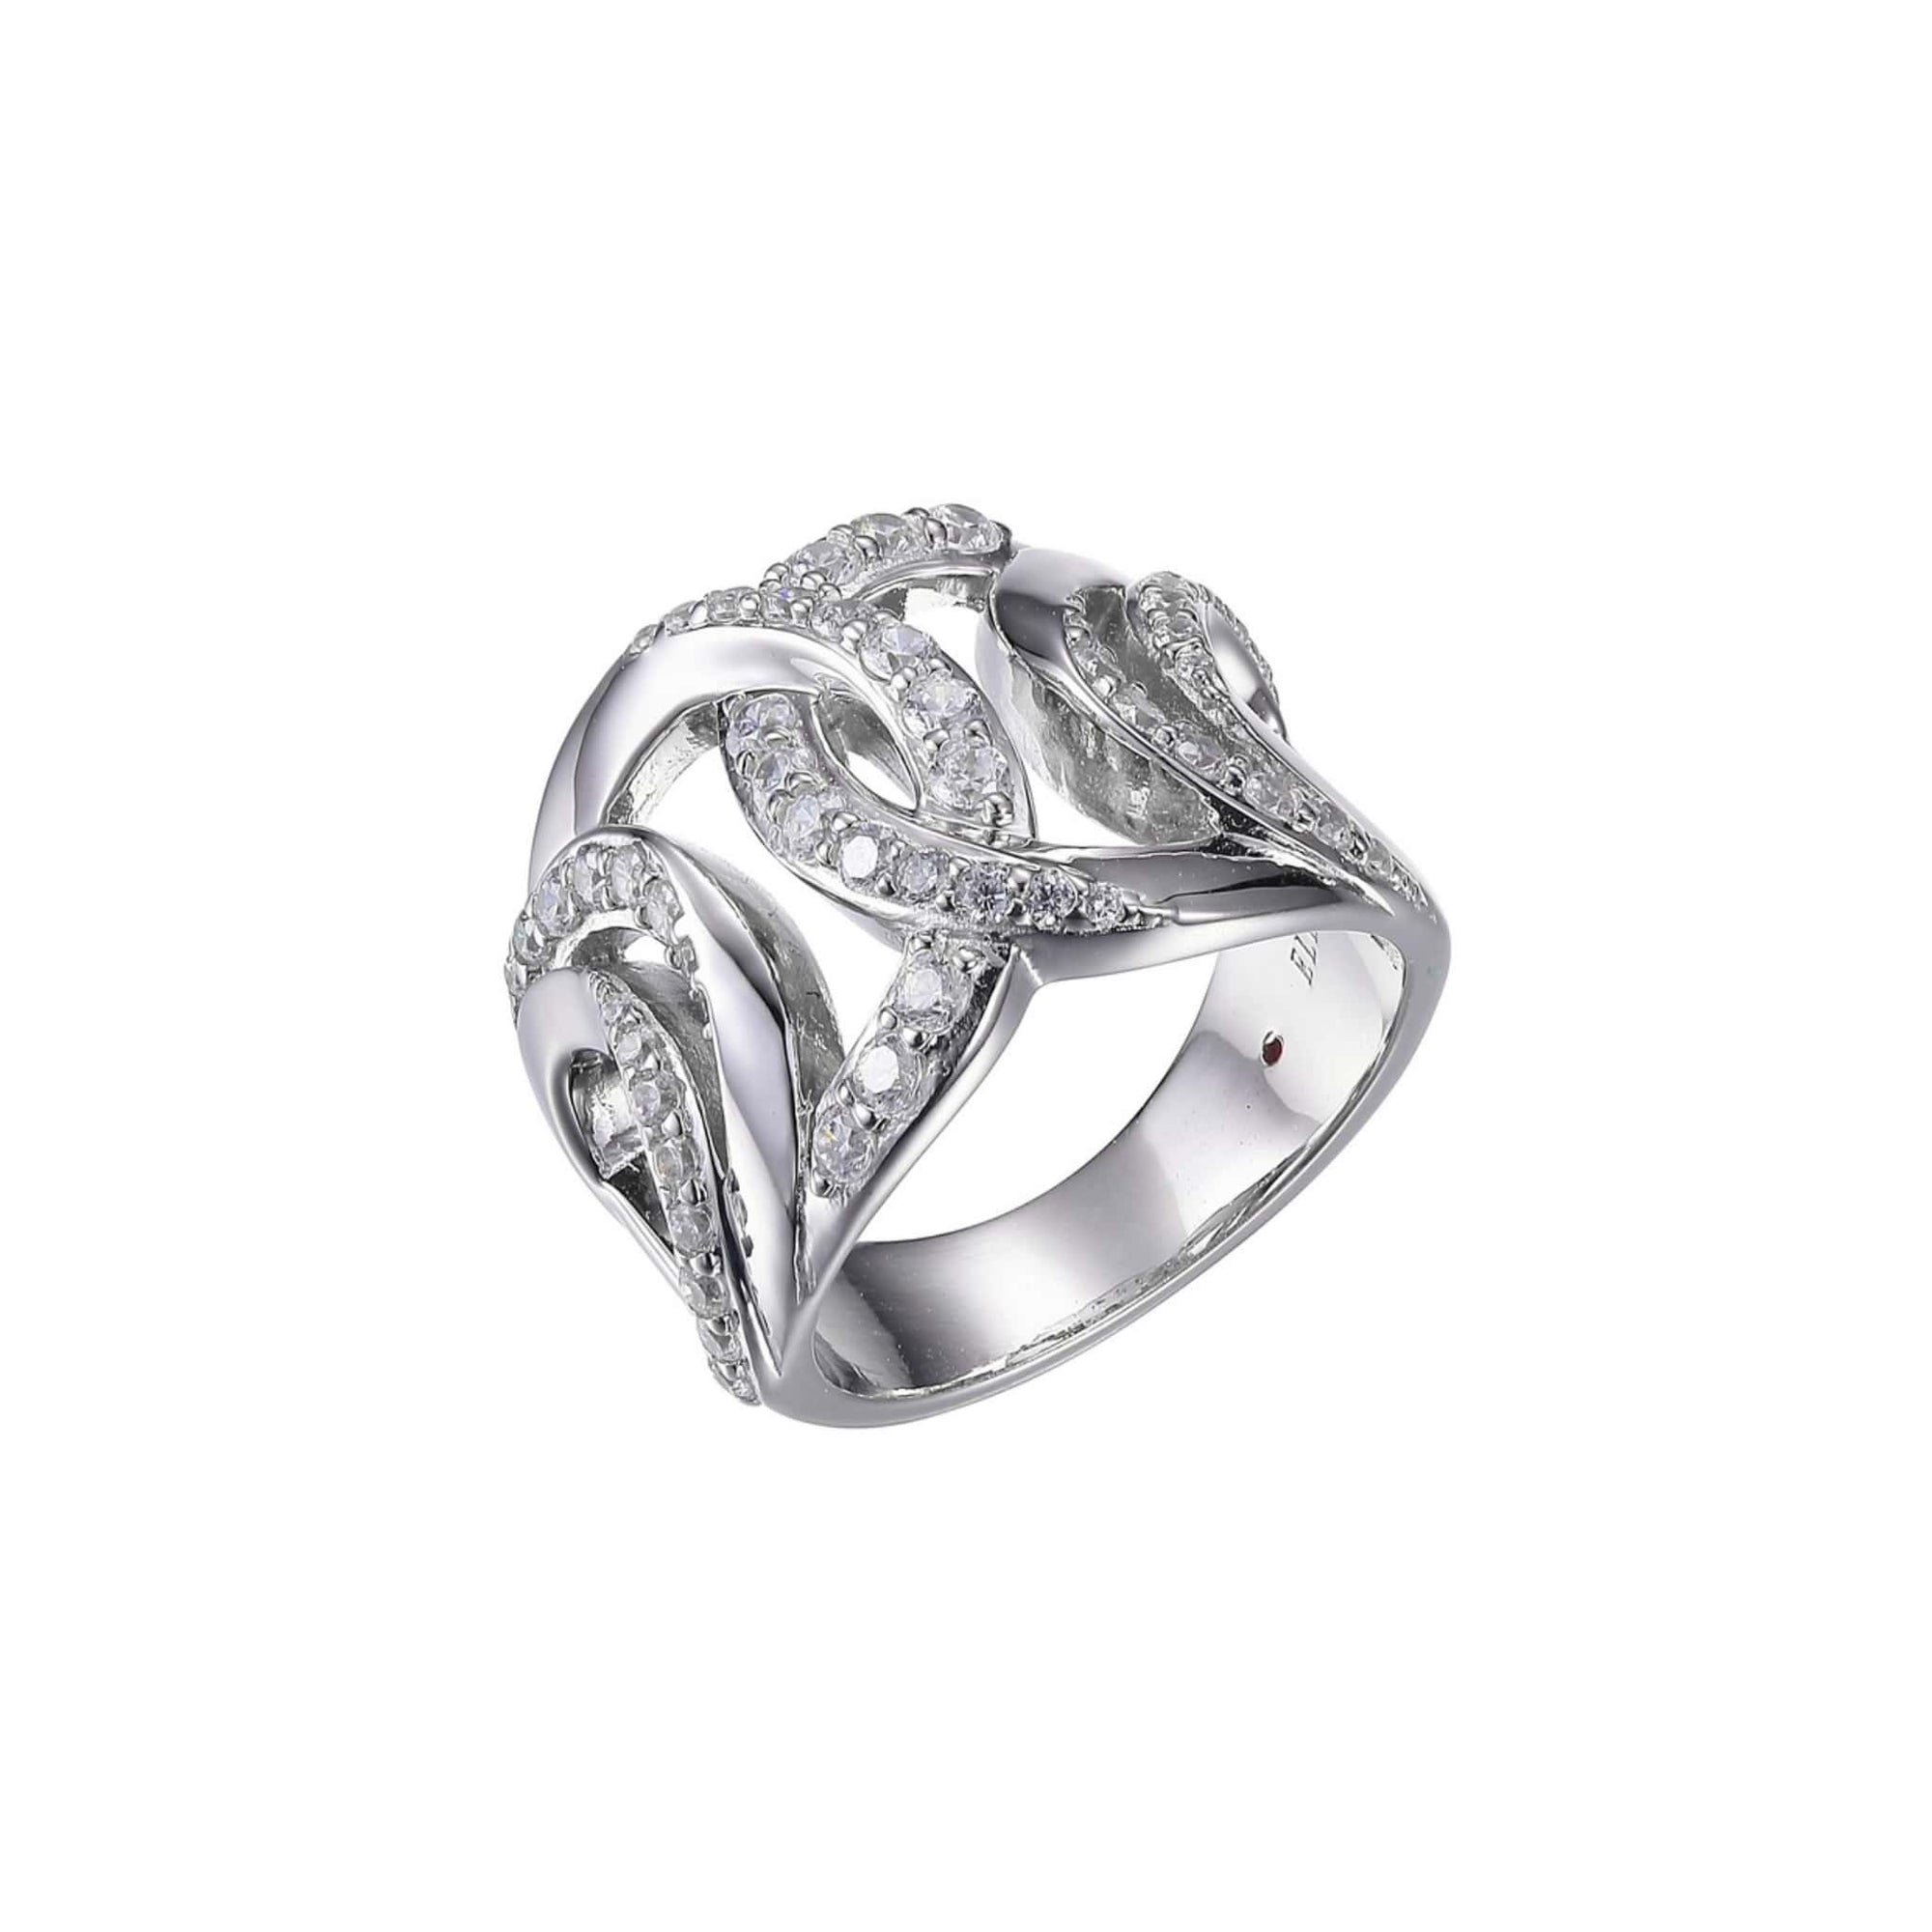 ELLE Majestic Silver Ring at Arman's Jewellers